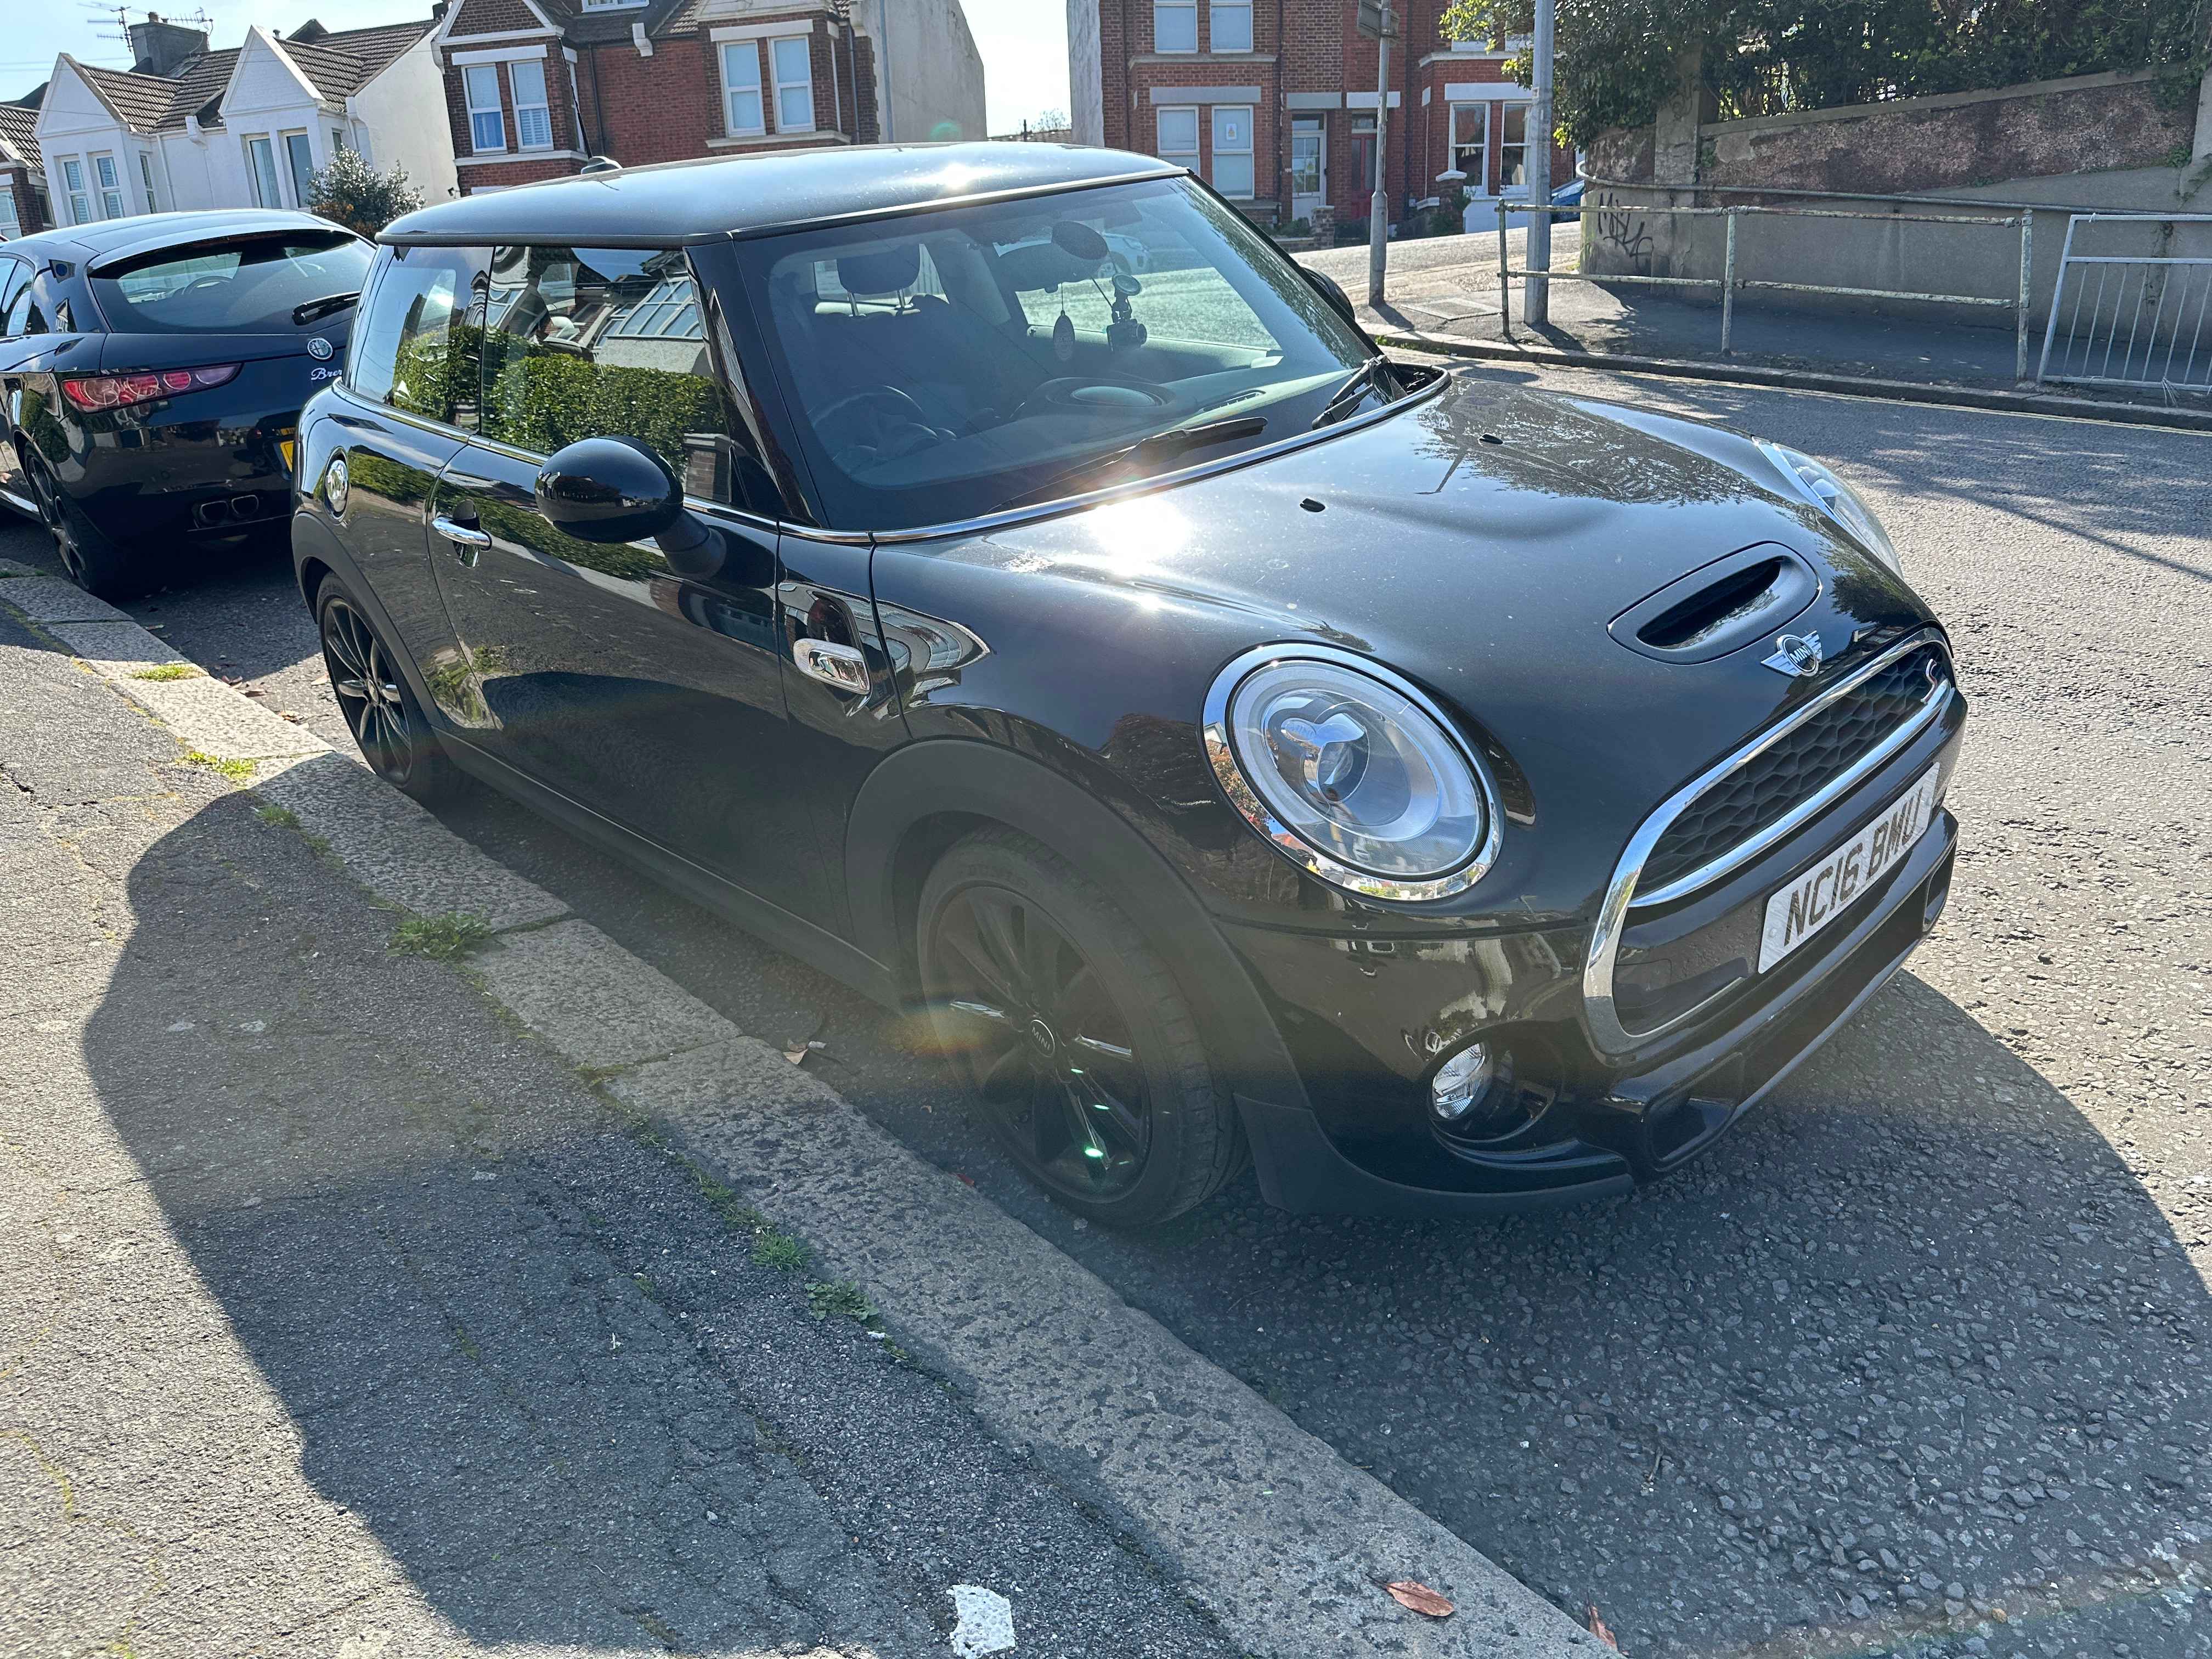 Photograph of NC16 BMU - a Black Mini Cooper parked in Hollingdean by a non-resident who uses the local area as part of their Brighton commute. The first of four photographs supplied by the residents of Hollingdean.